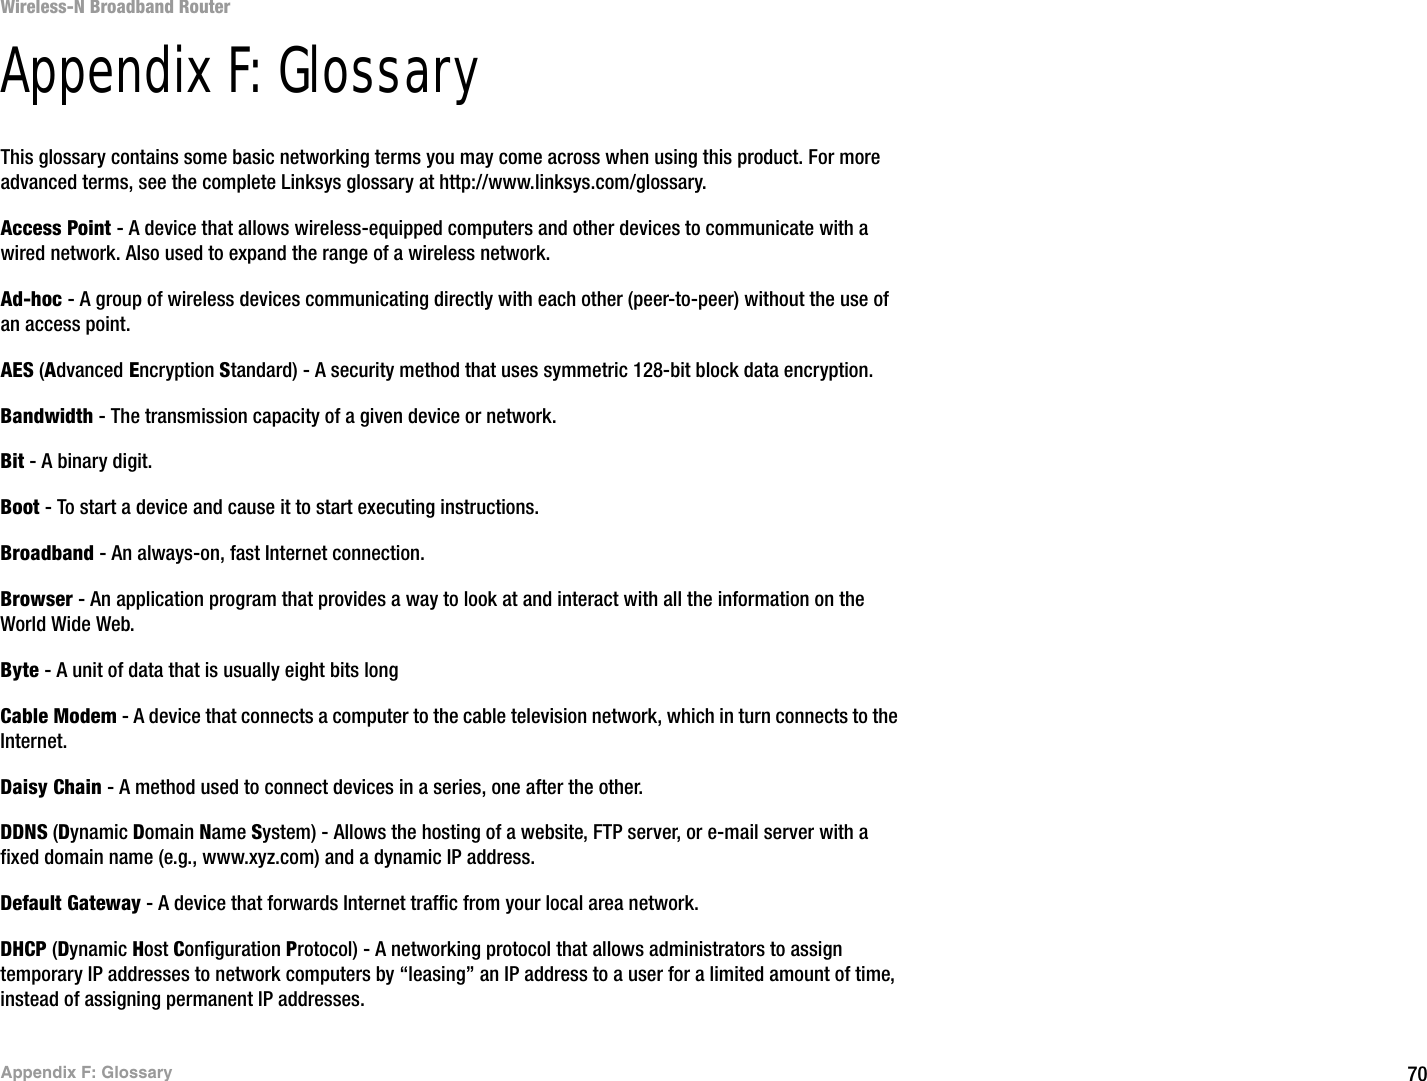 70Appendix F: GlossaryWireless-N Broadband RouterAppendix F: GlossaryThis glossary contains some basic networking terms you may come across when using this product. For more advanced terms, see the complete Linksys glossary at http://www.linksys.com/glossary.Access Point - A device that allows wireless-equipped computers and other devices to communicate with a wired network. Also used to expand the range of a wireless network.Ad-hoc - A group of wireless devices communicating directly with each other (peer-to-peer) without the use of an access point.AES (Advanced Encryption Standard) - A security method that uses symmetric 128-bit block data encryption.Bandwidth - The transmission capacity of a given device or network.Bit - A binary digit.Boot - To start a device and cause it to start executing instructions.Broadband - An always-on, fast Internet connection.Browser - An application program that provides a way to look at and interact with all the information on the World Wide Web. Byte - A unit of data that is usually eight bits longCable Modem - A device that connects a computer to the cable television network, which in turn connects to the Internet.Daisy Chain - A method used to connect devices in a series, one after the other.DDNS (Dynamic Domain Name System) - Allows the hosting of a website, FTP server, or e-mail server with a fixed domain name (e.g., www.xyz.com) and a dynamic IP address.Default Gateway - A device that forwards Internet traffic from your local area network.DHCP (Dynamic Host Configuration Protocol) - A networking protocol that allows administrators to assign temporary IP addresses to network computers by “leasing” an IP address to a user for a limited amount of time, instead of assigning permanent IP addresses.